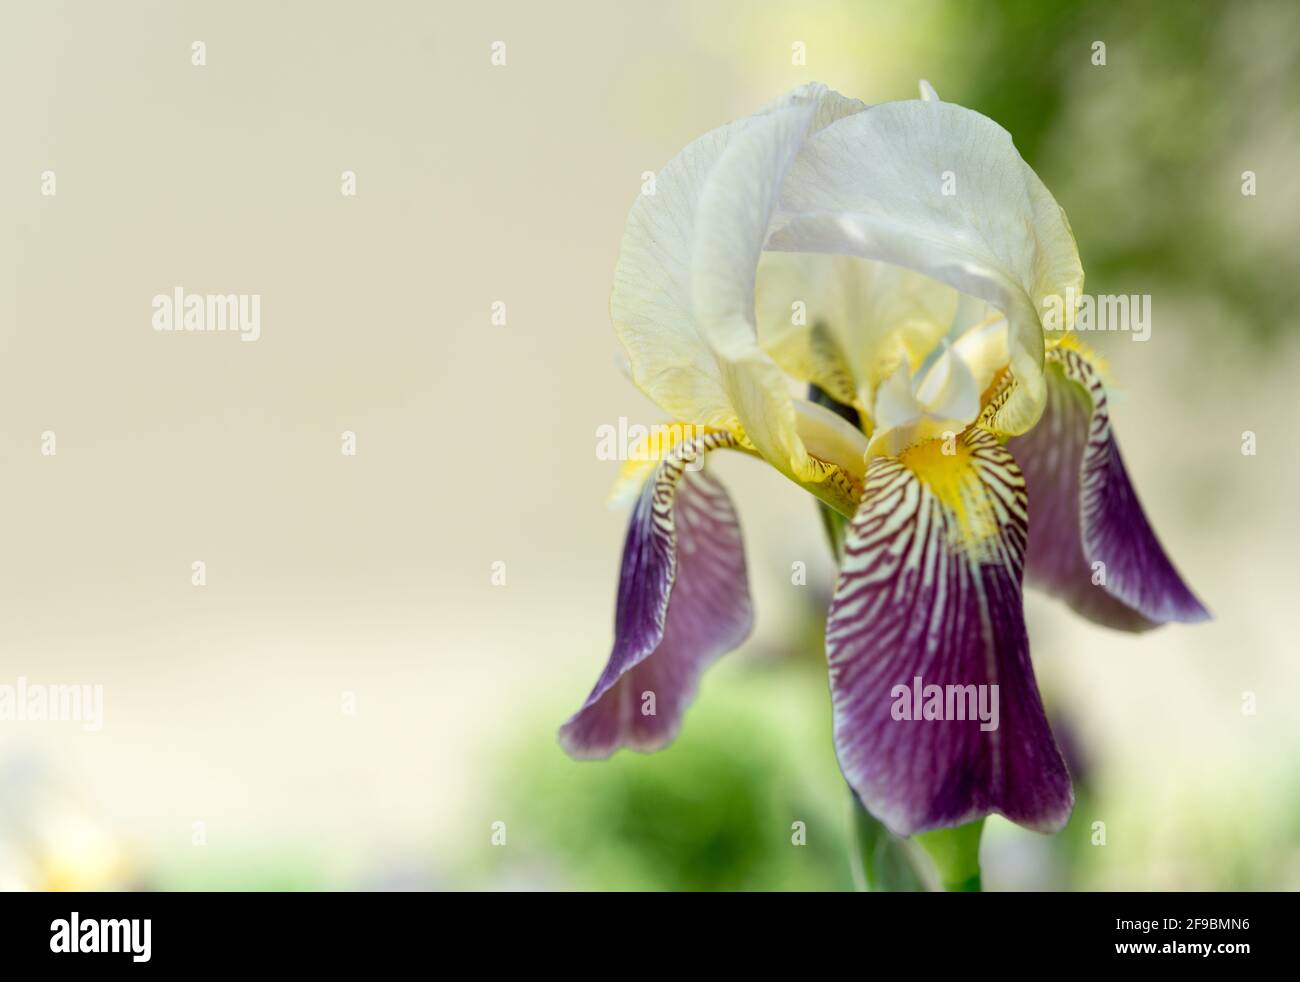 simple, isolated purple and yellow iris against a neutral beige background Stock Photo